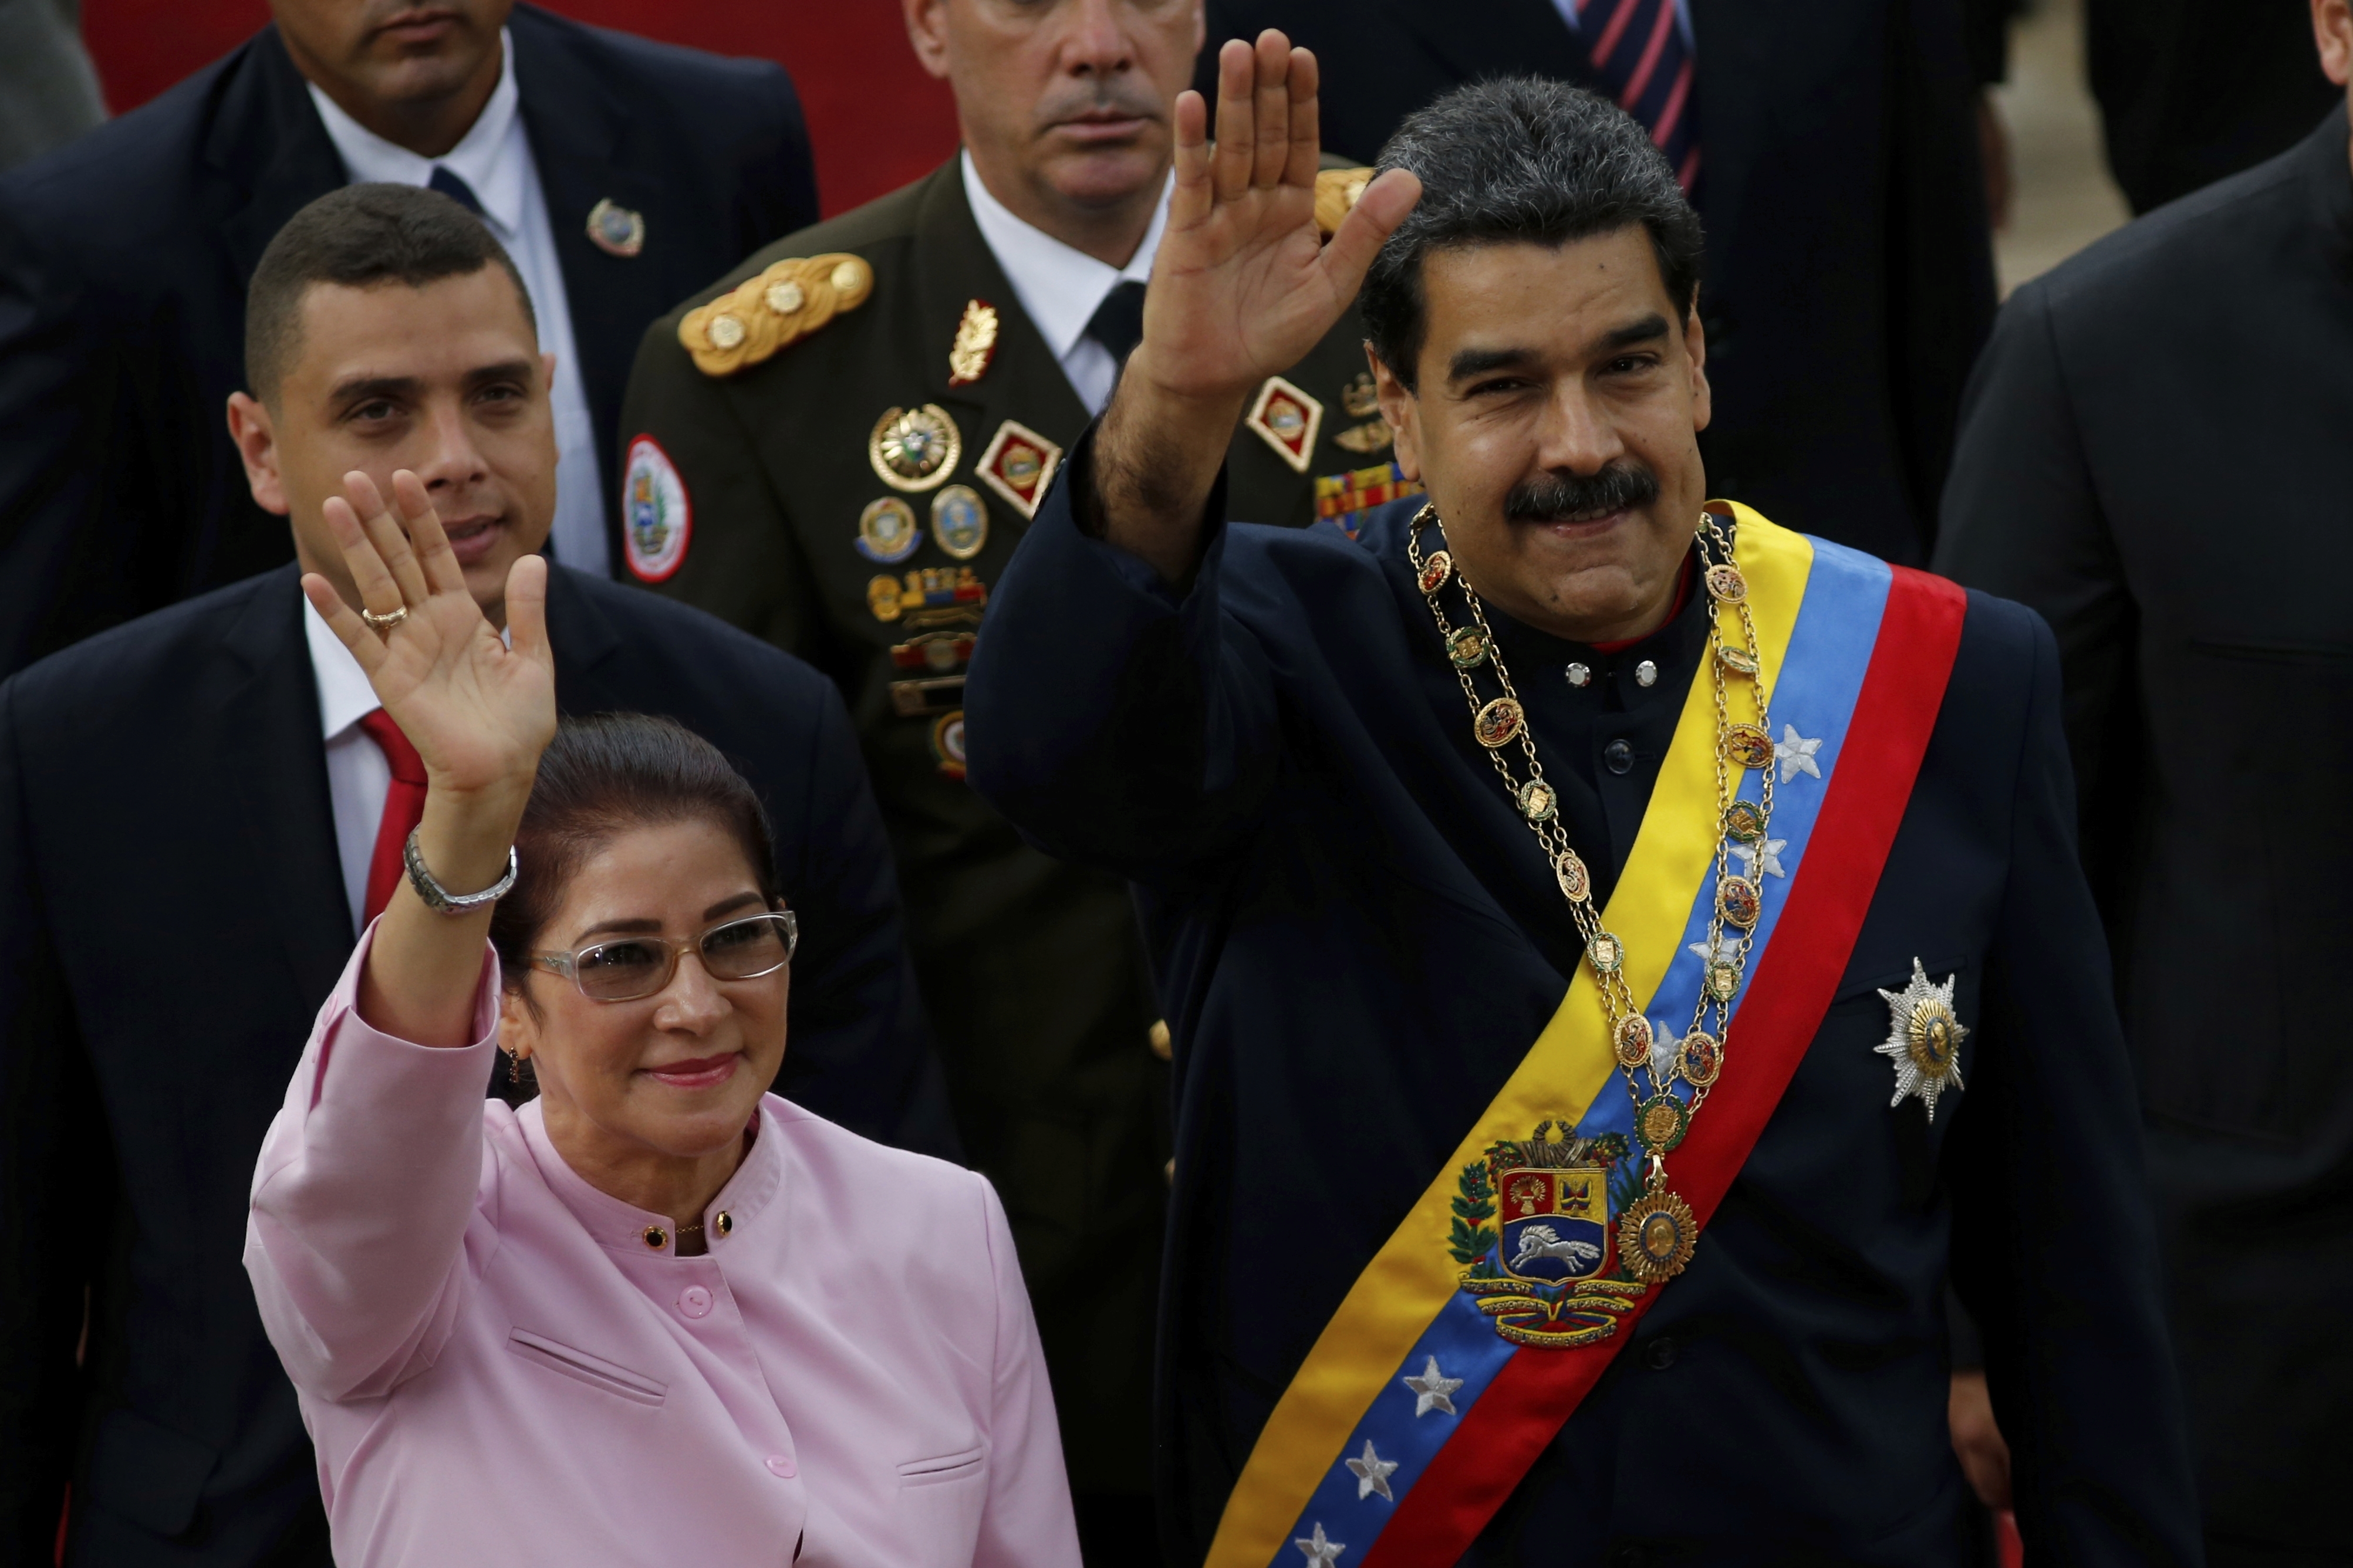 Venezuela's President Nicolas Maduro, right, and his wife Cilia Flores wave as they arrive to the National Assembly building for a session of the Constitutional Assembly in Caracas, Venezuela, Aug. 10, 2017. (Ariana Cubillos—AP)